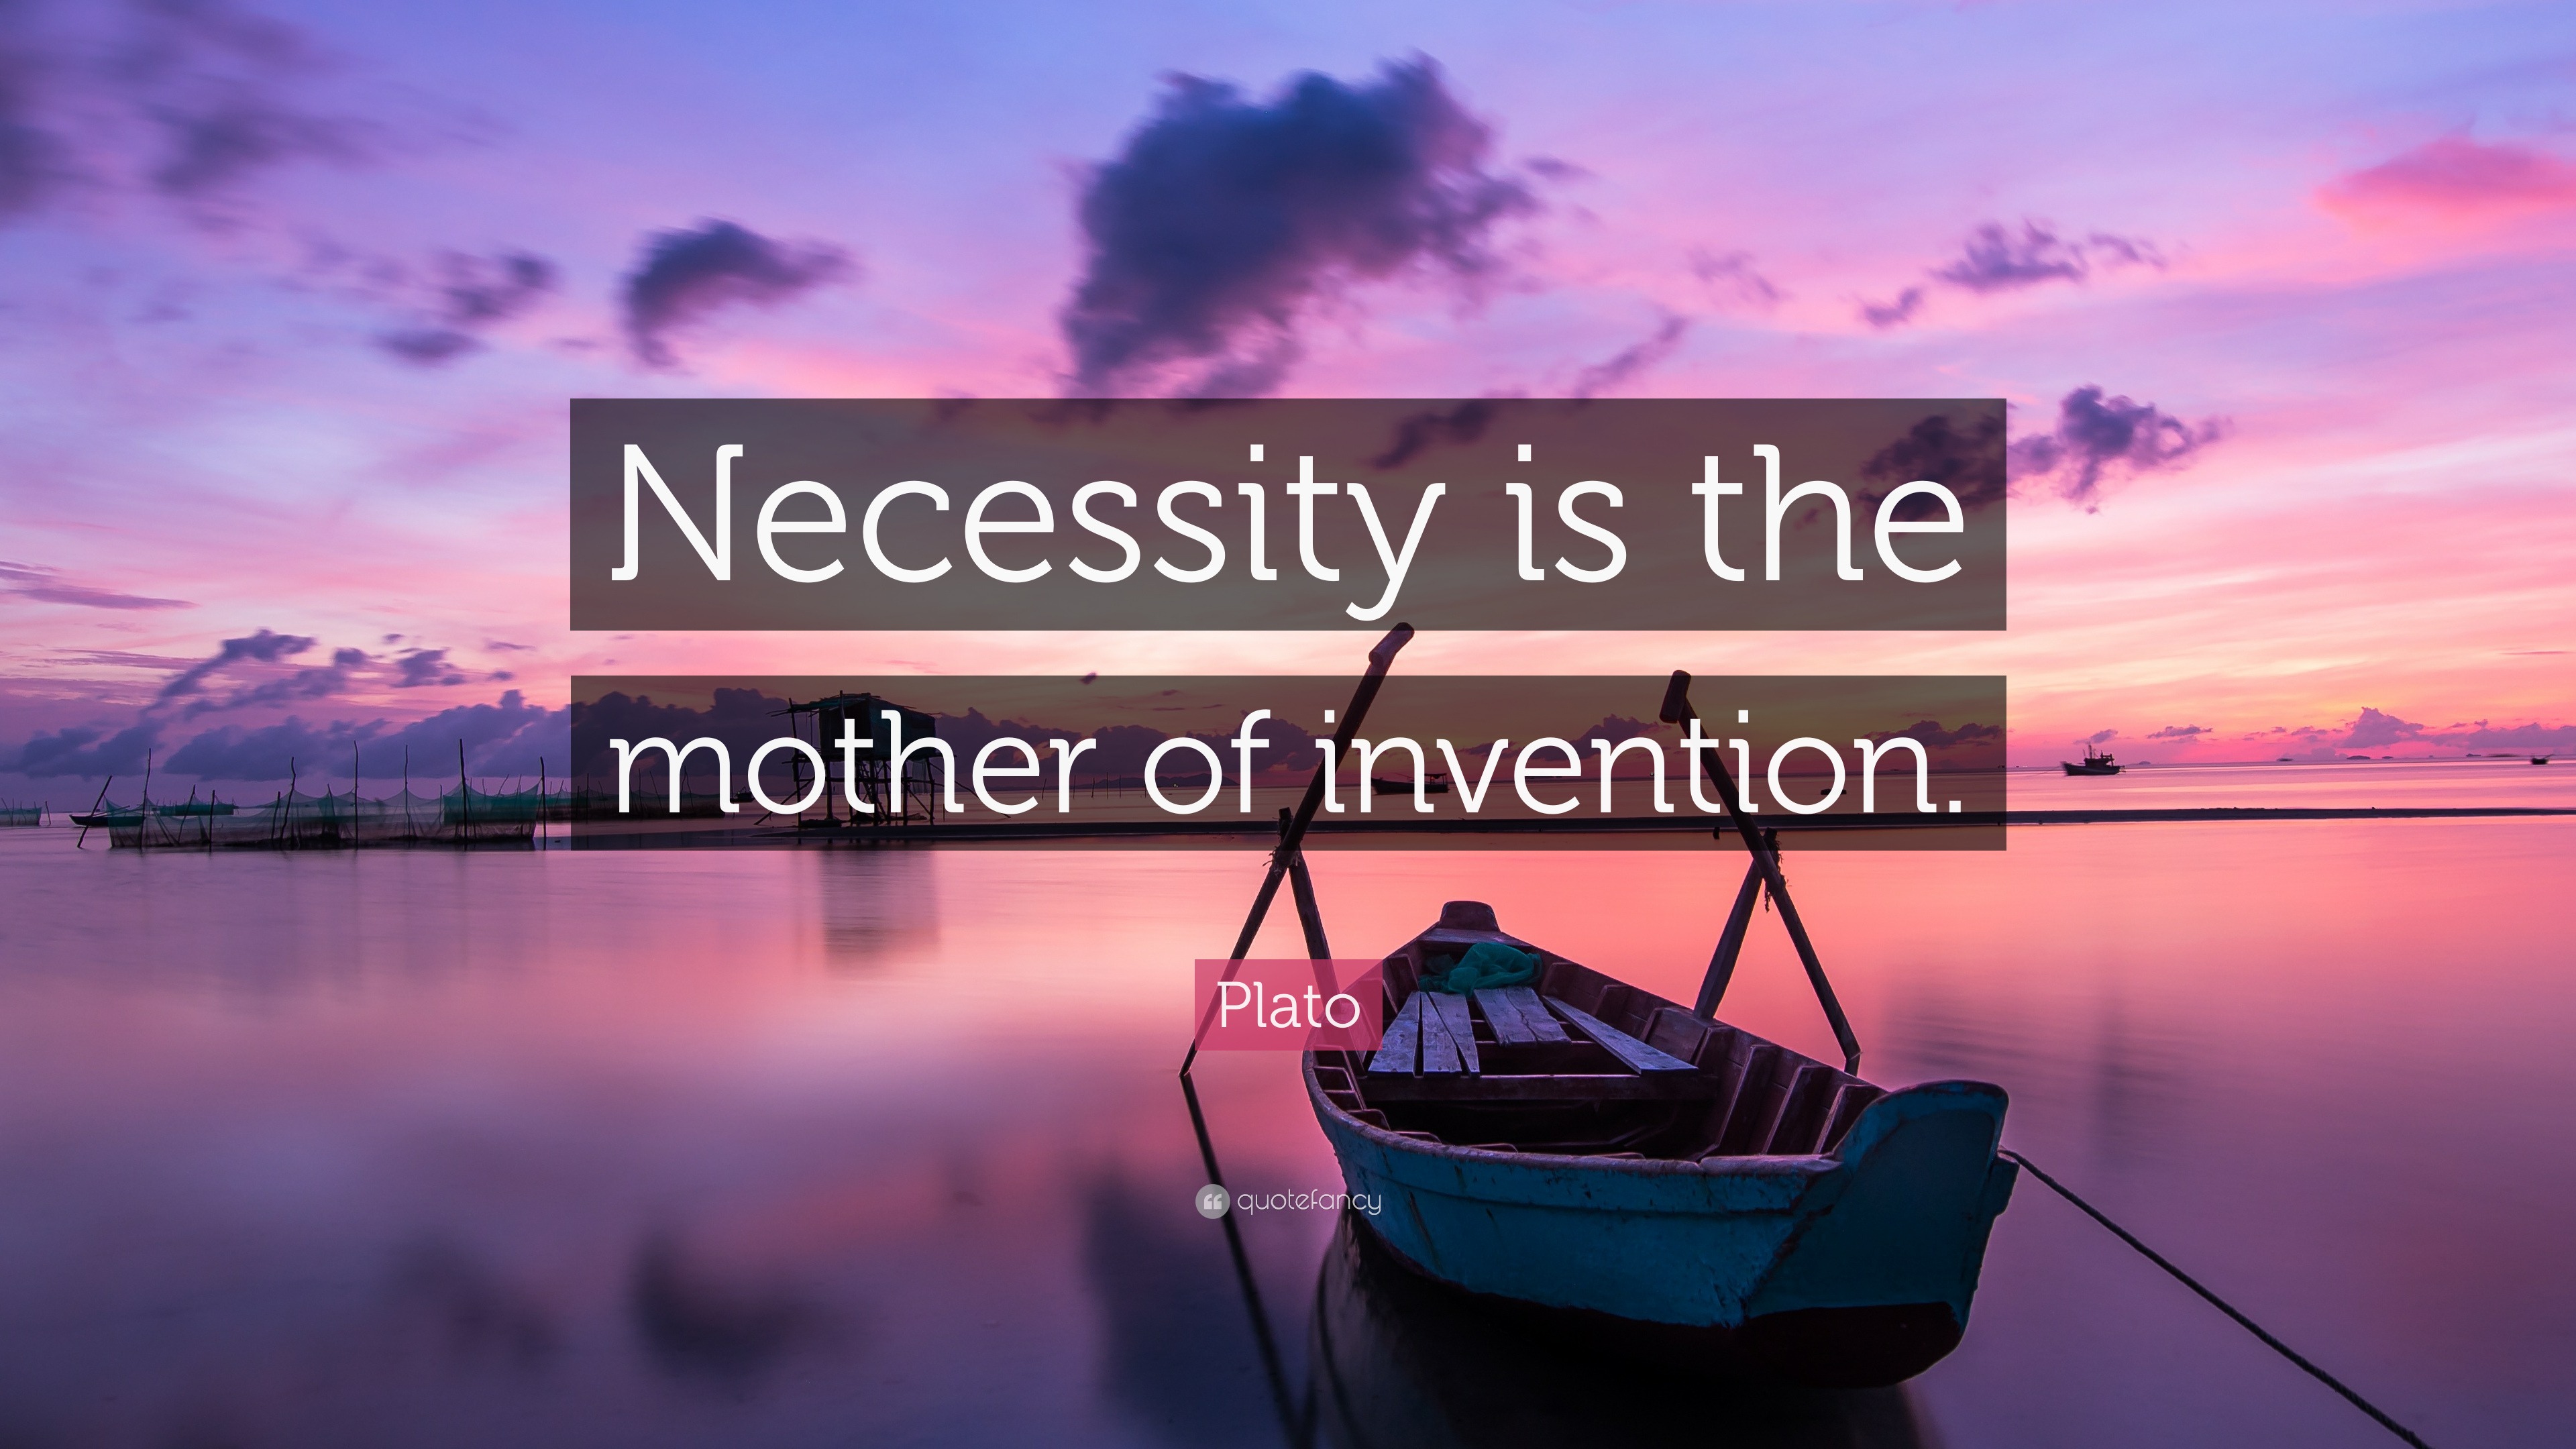 essay on necessity is the mother of invention